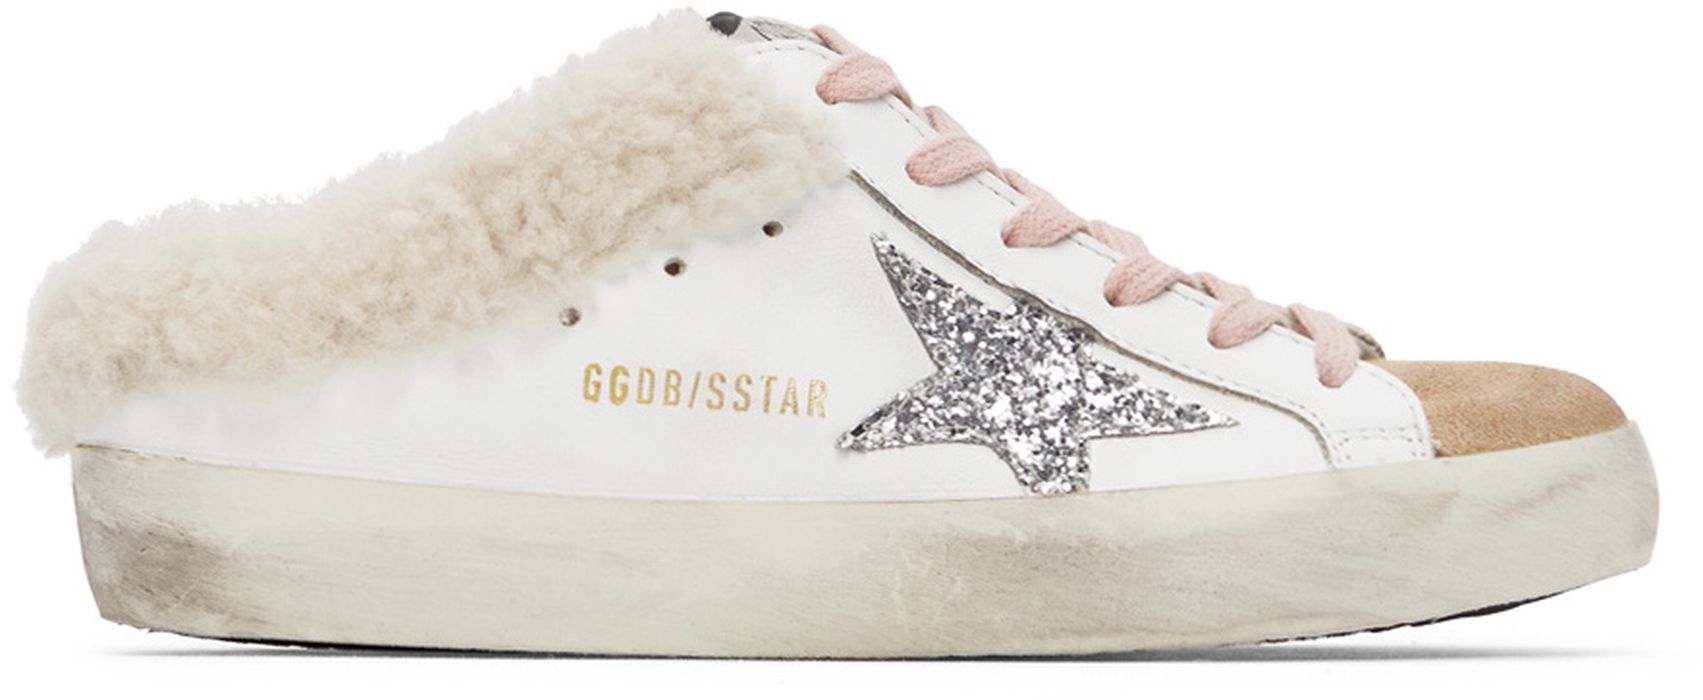 Golden Goose SSENSE Exclusive White & Brown Shearling Super-Star Sneakers